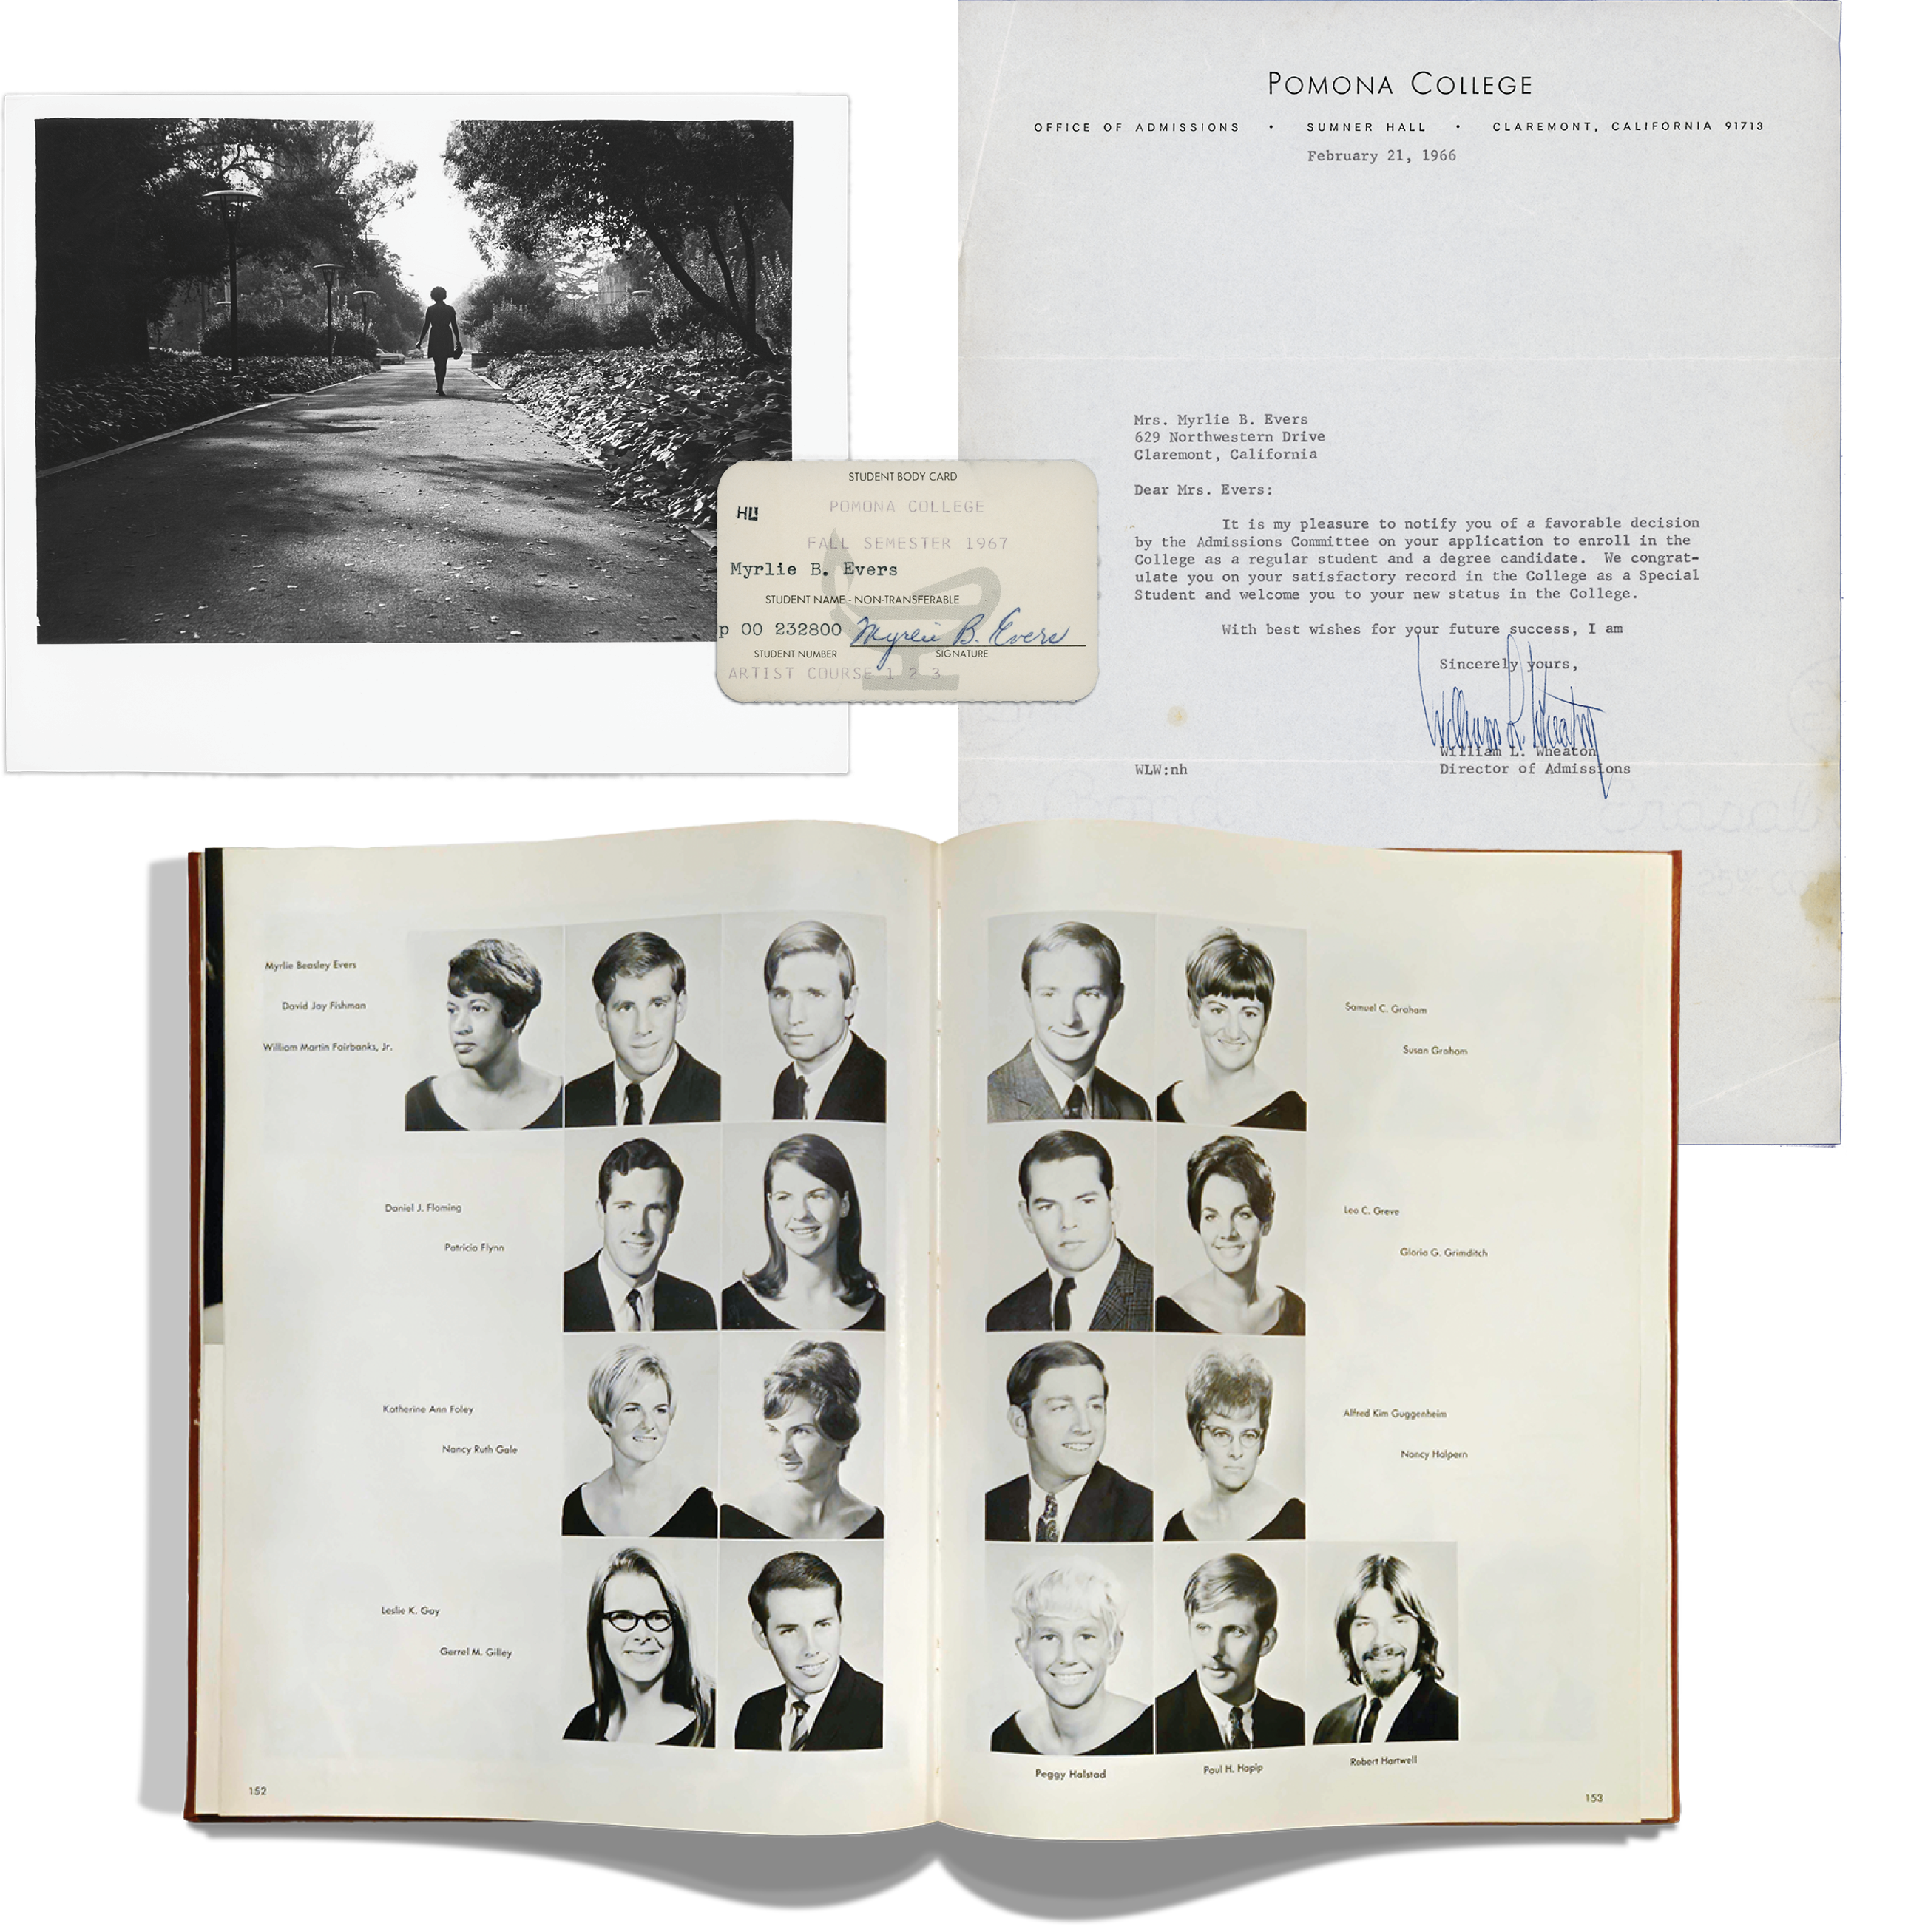 From left: Evers-Williams on the Pomona College campus, 1970. Evers-Williams' identification card, fall 1967. Letter of change of status, Pomona College, 1966. Pomona College yearbook, The Metate, 1968 with photo of Evers-Williams, top left corner.